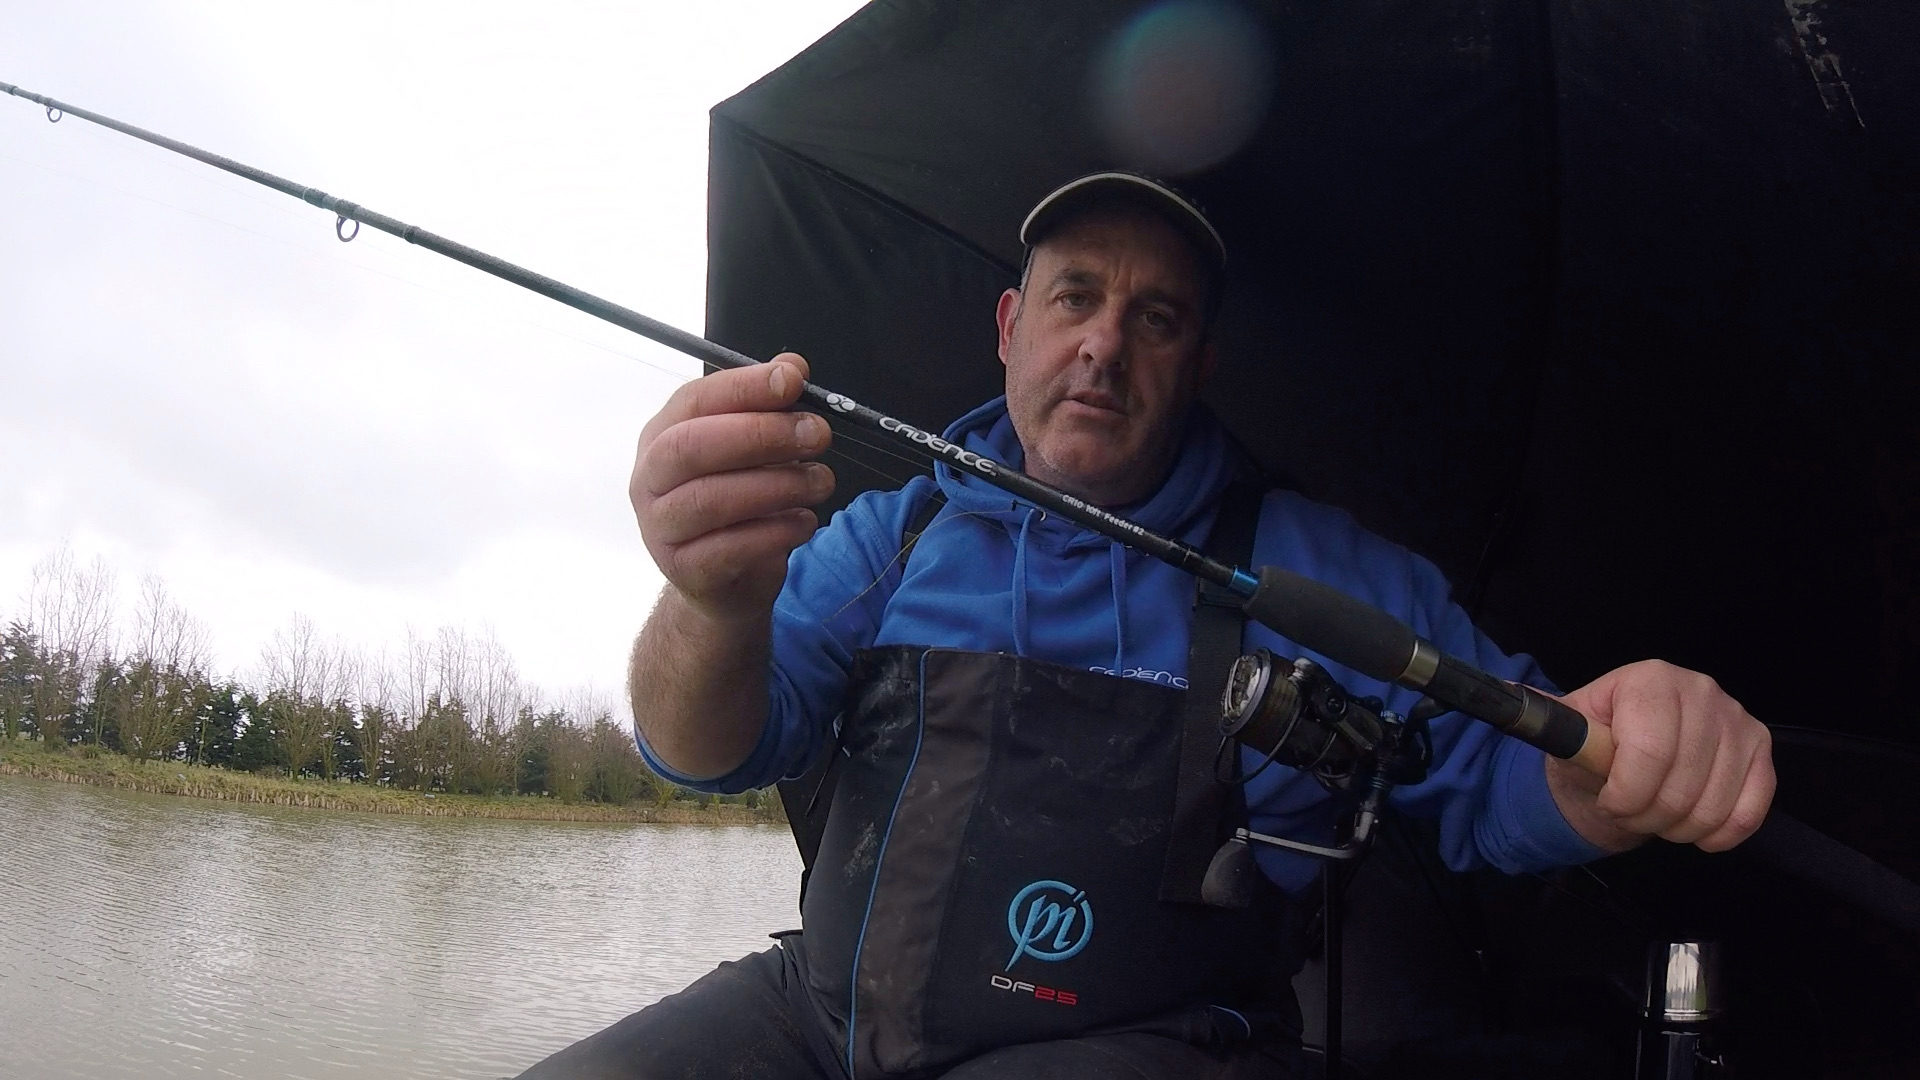 Steven Cowley on the Cadence CR10 10ft and 11ft Feeder Rods